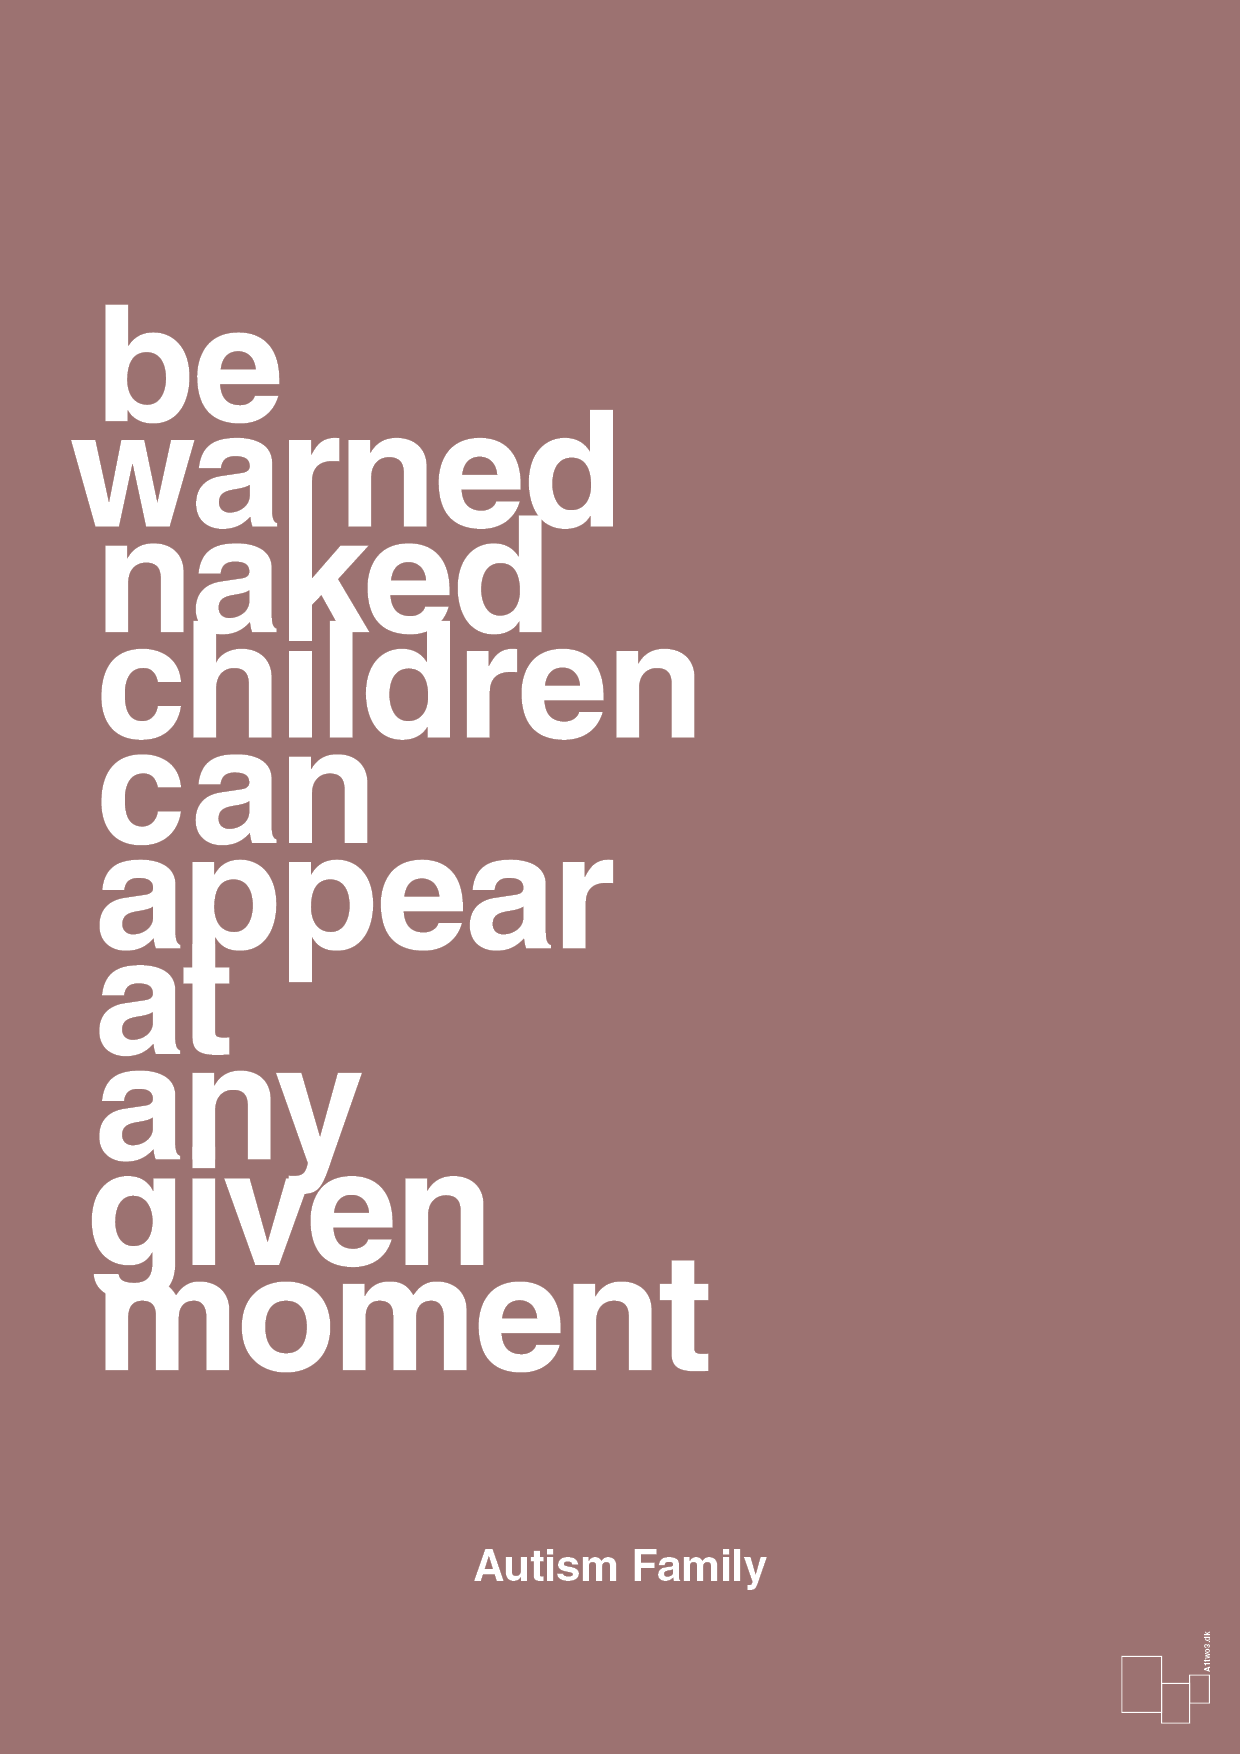 be warned naked children can appear at any given moment - Plakat med Samfund i Plum